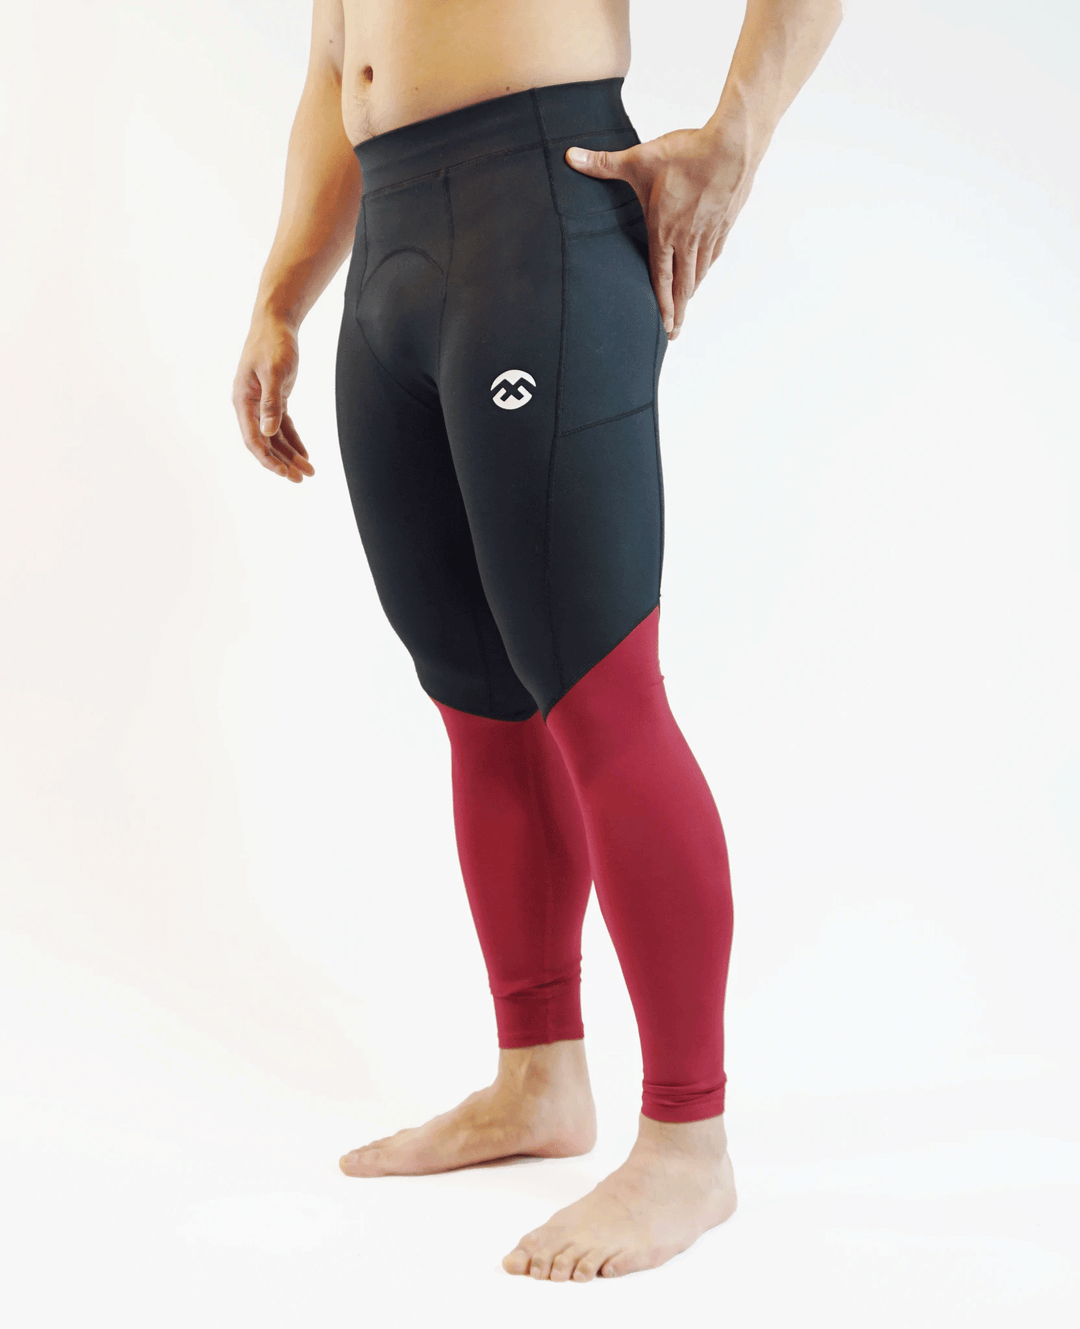 Black and red men's powerlifting tights